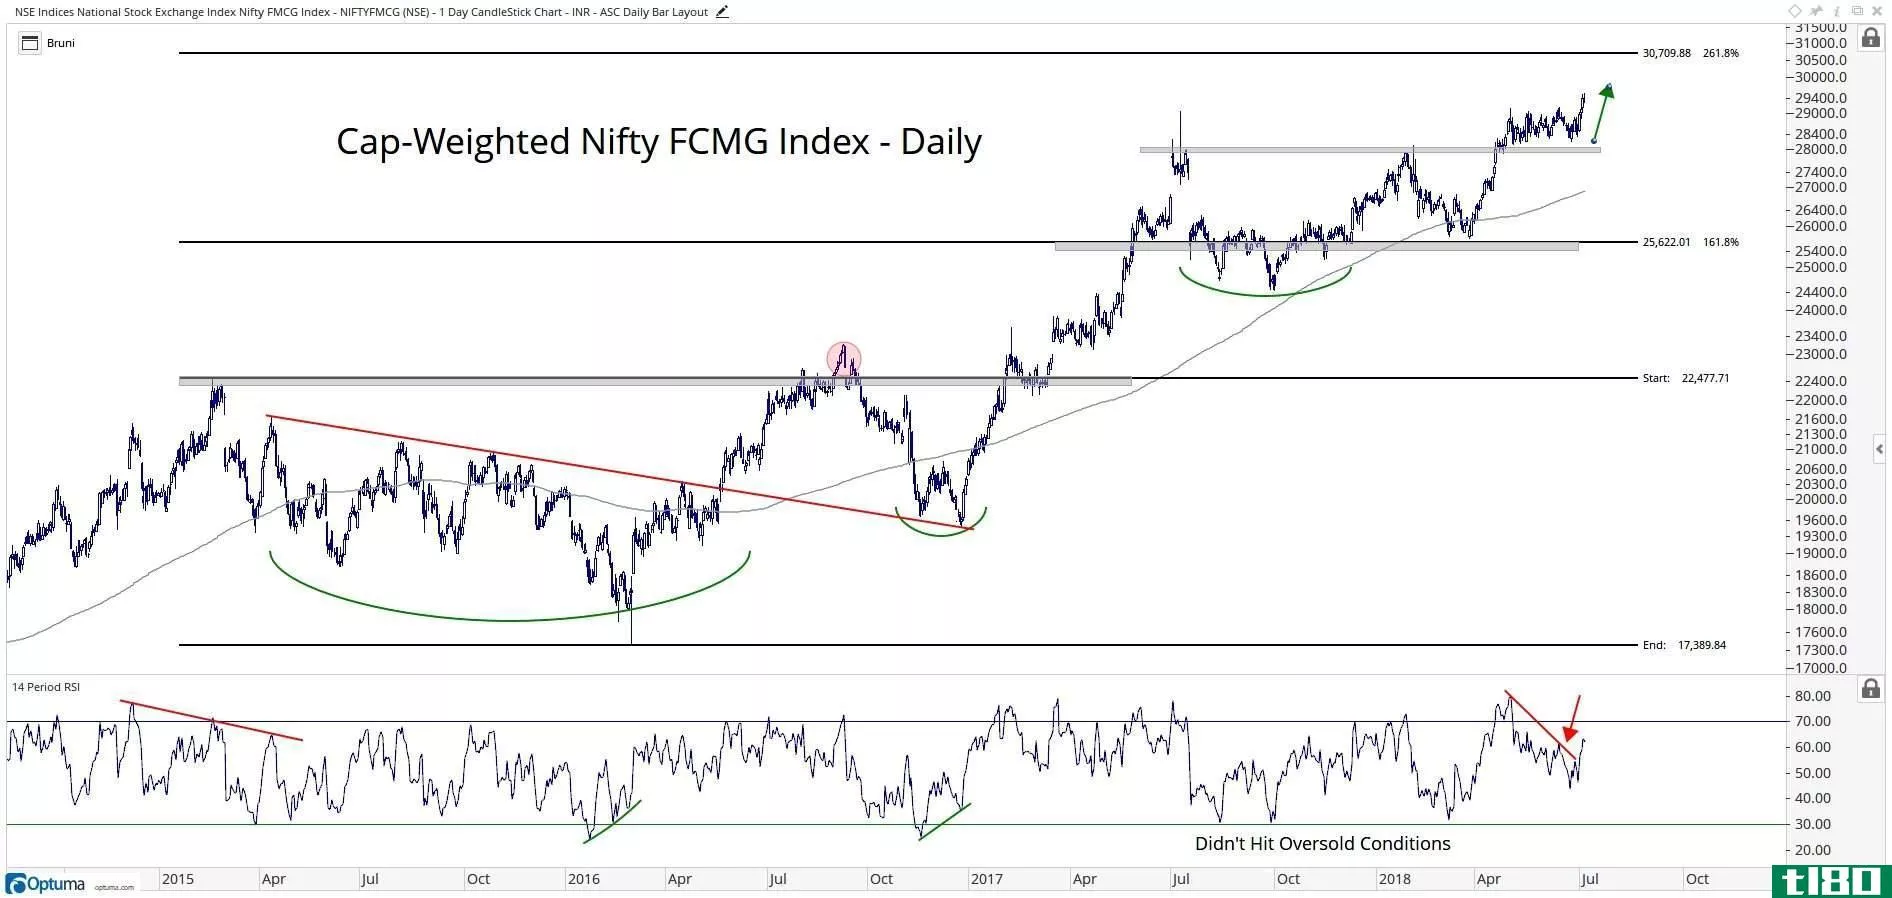 Chart showing performance of Nifty FMCG